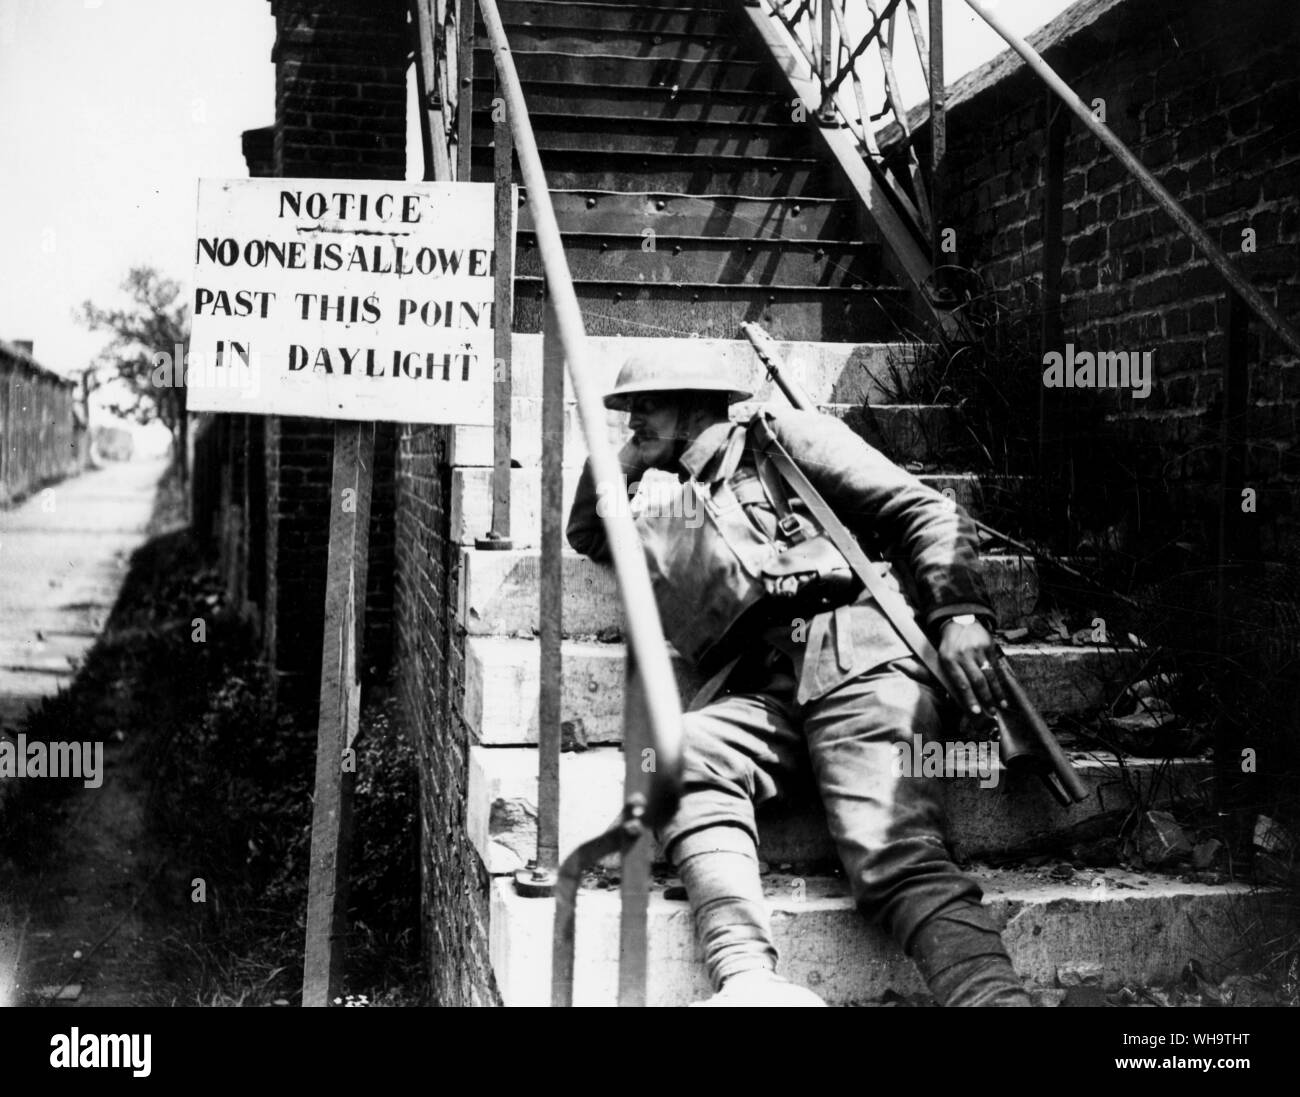 WW1/France: Battle of the Lys. A 2nd Scottish Rifles sentry in Lievin by a notice saying that no one is allowed past this point in daylight, May 1918. Stock Photo